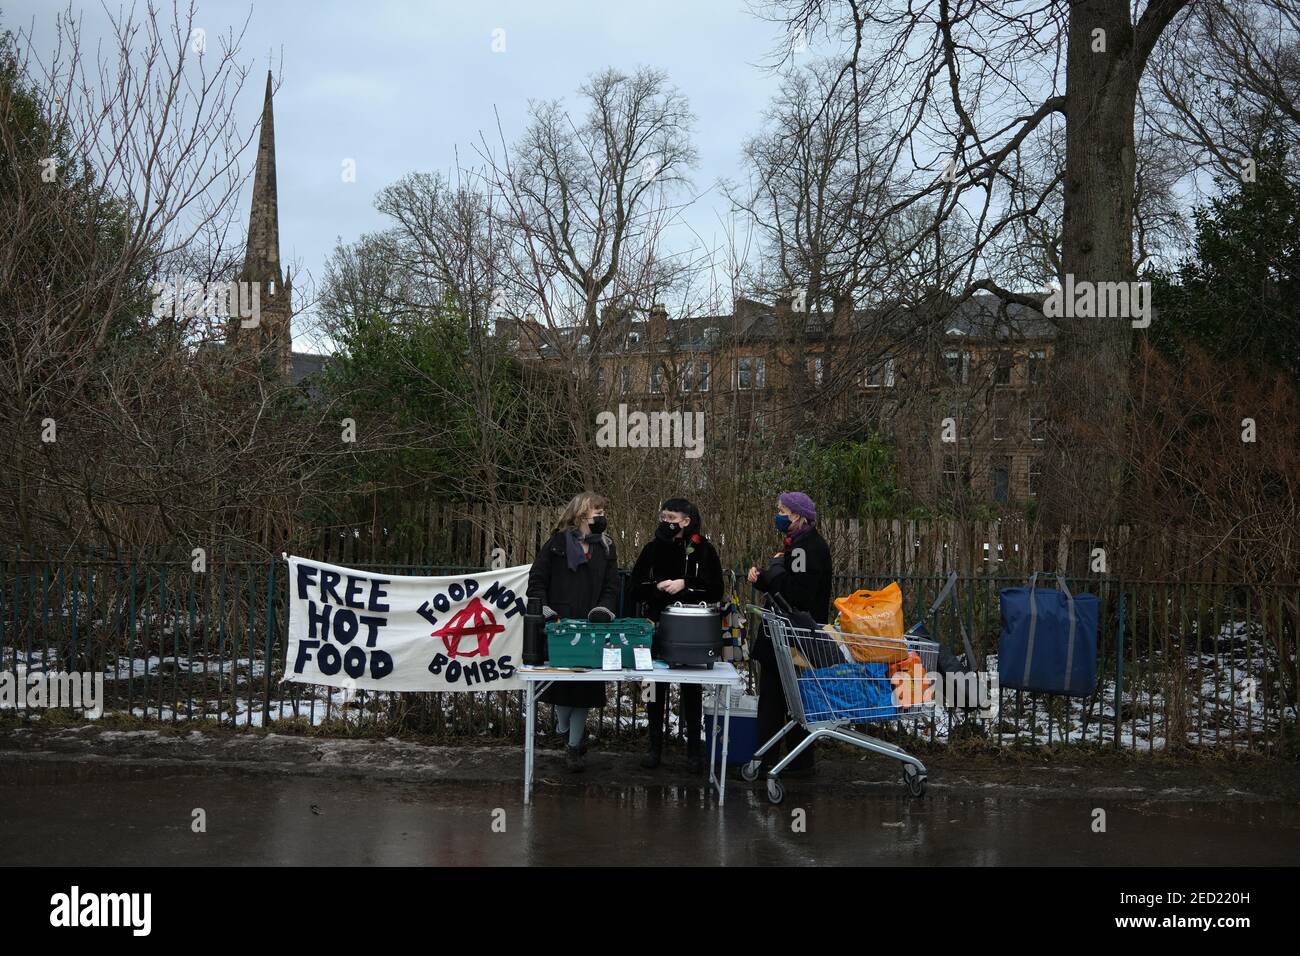 Glasgow, UK, on 14 February 2021. Three volunteers for 'Food Not Bombs (Glasgow)' organisation hand out hot soup and vegan haggis, in Queen's Park. This is the 4th weekend of the stall providing food, donated by local companies, to anyone who requests it, and clothes to those in need, in the city's Southside during the current CoronaVirus Covid-19 health pandemic. Photo credit: Jeremy Sutton-Hibbert/ Alamy Live News. Stock Photo